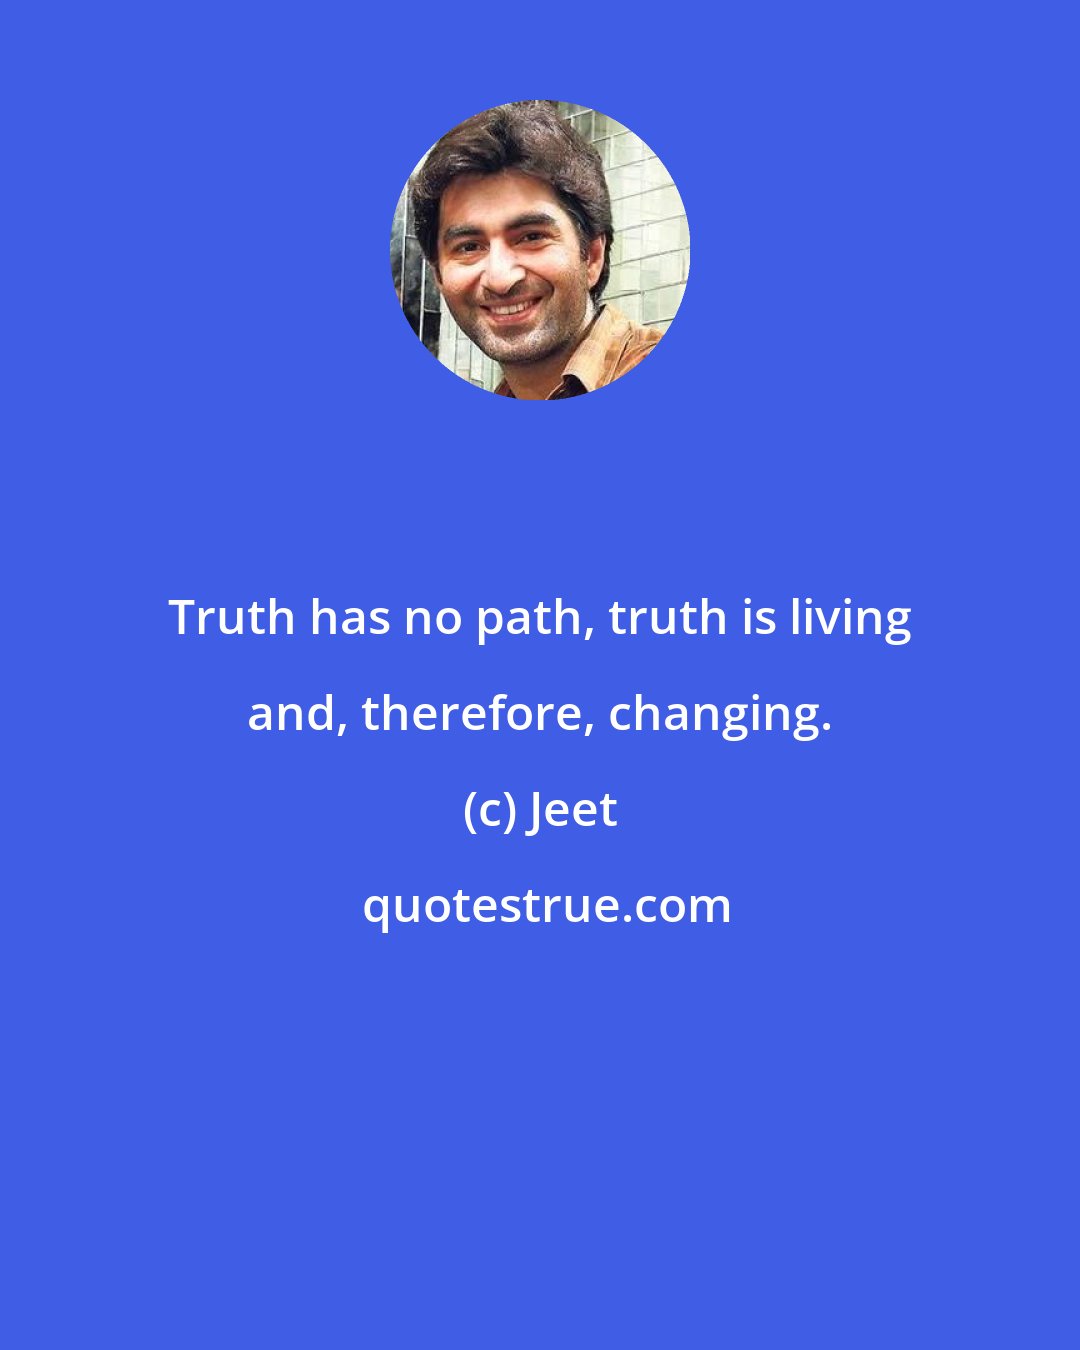 Jeet: Truth has no path, truth is living and, therefore, changing.